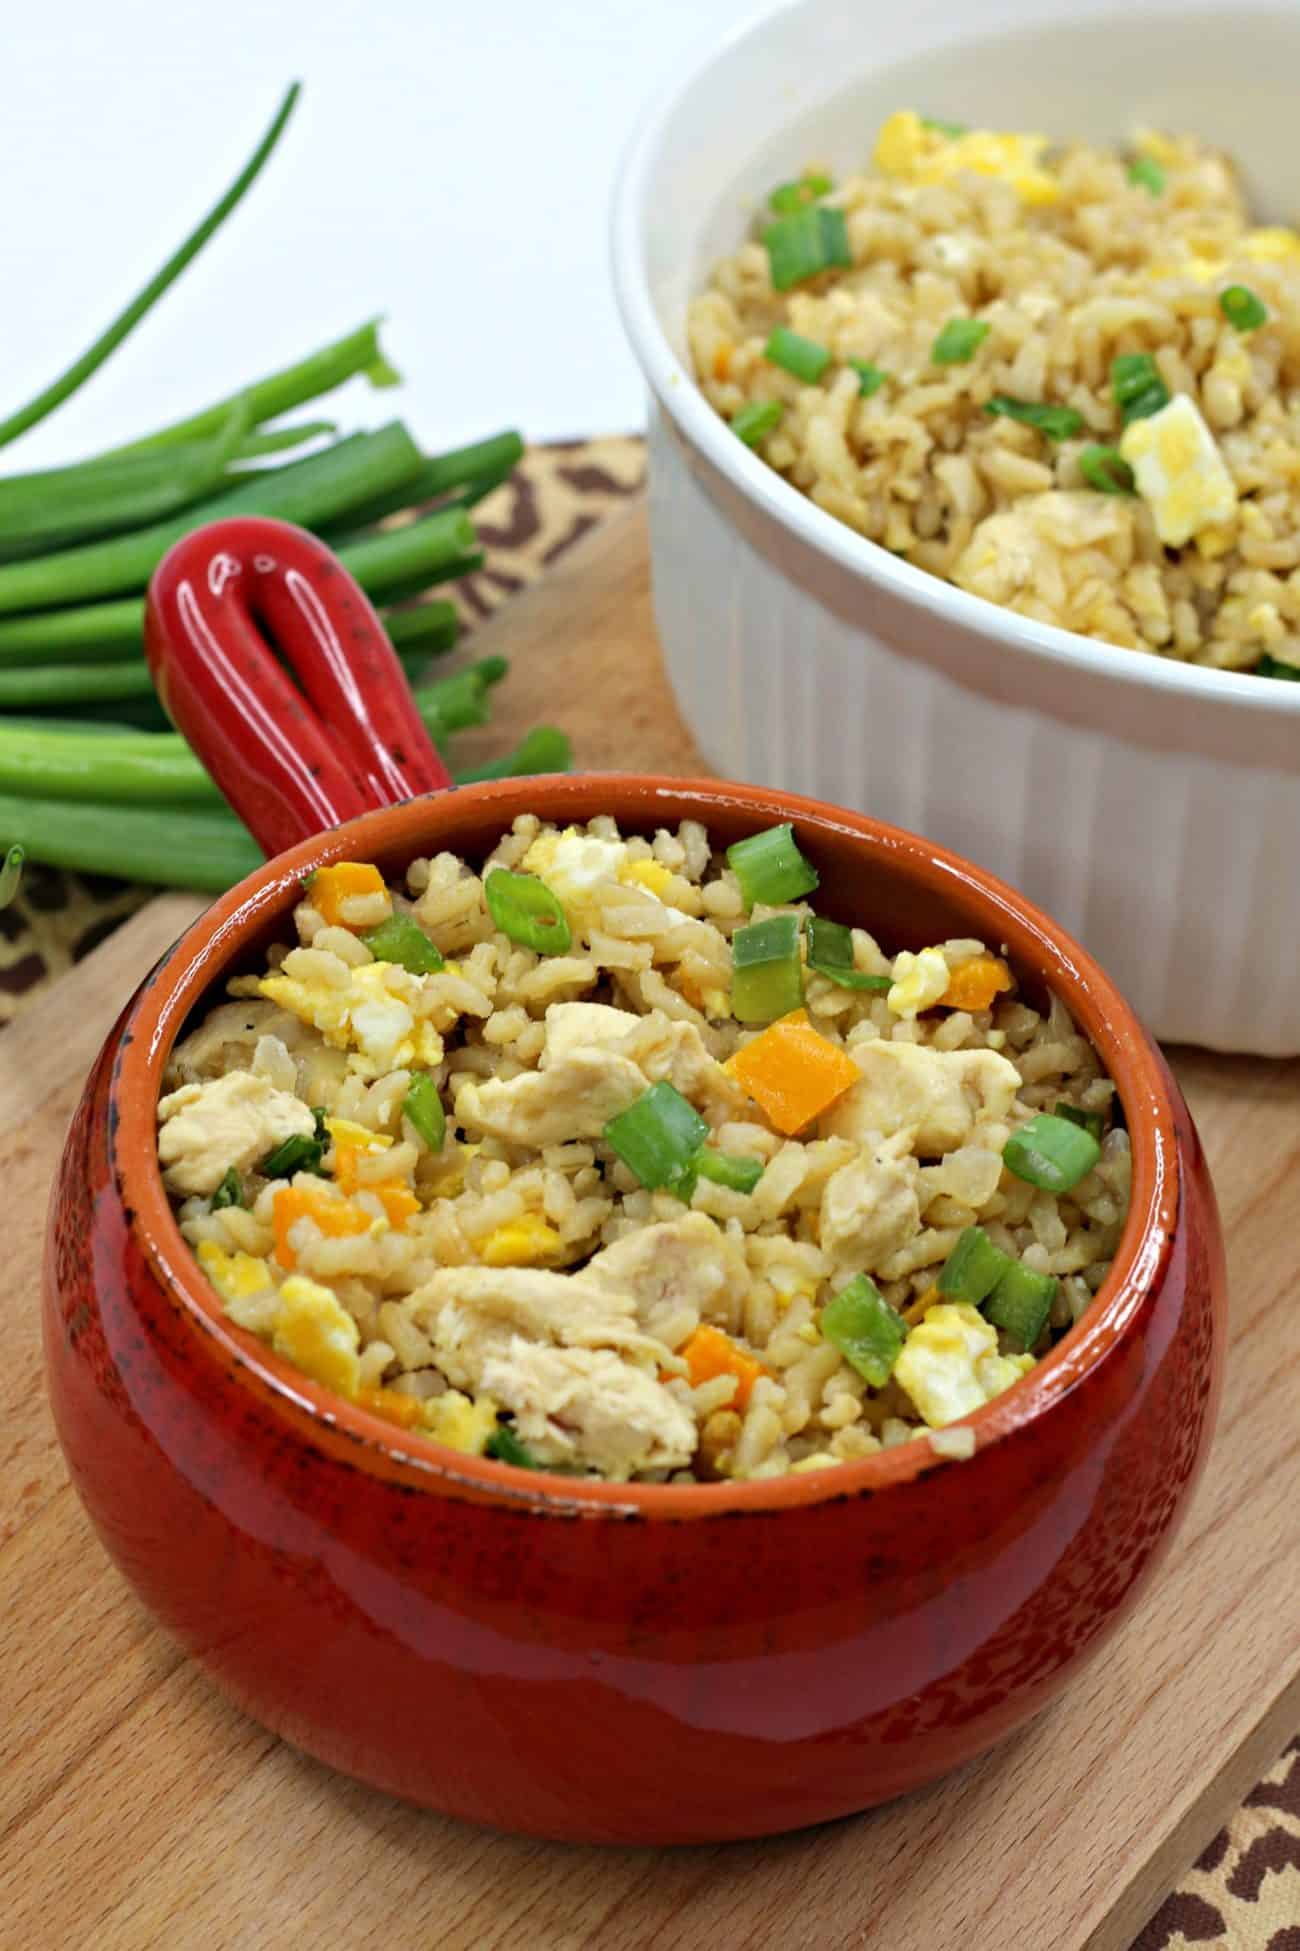 Clean Eating Chicken Fried Rice